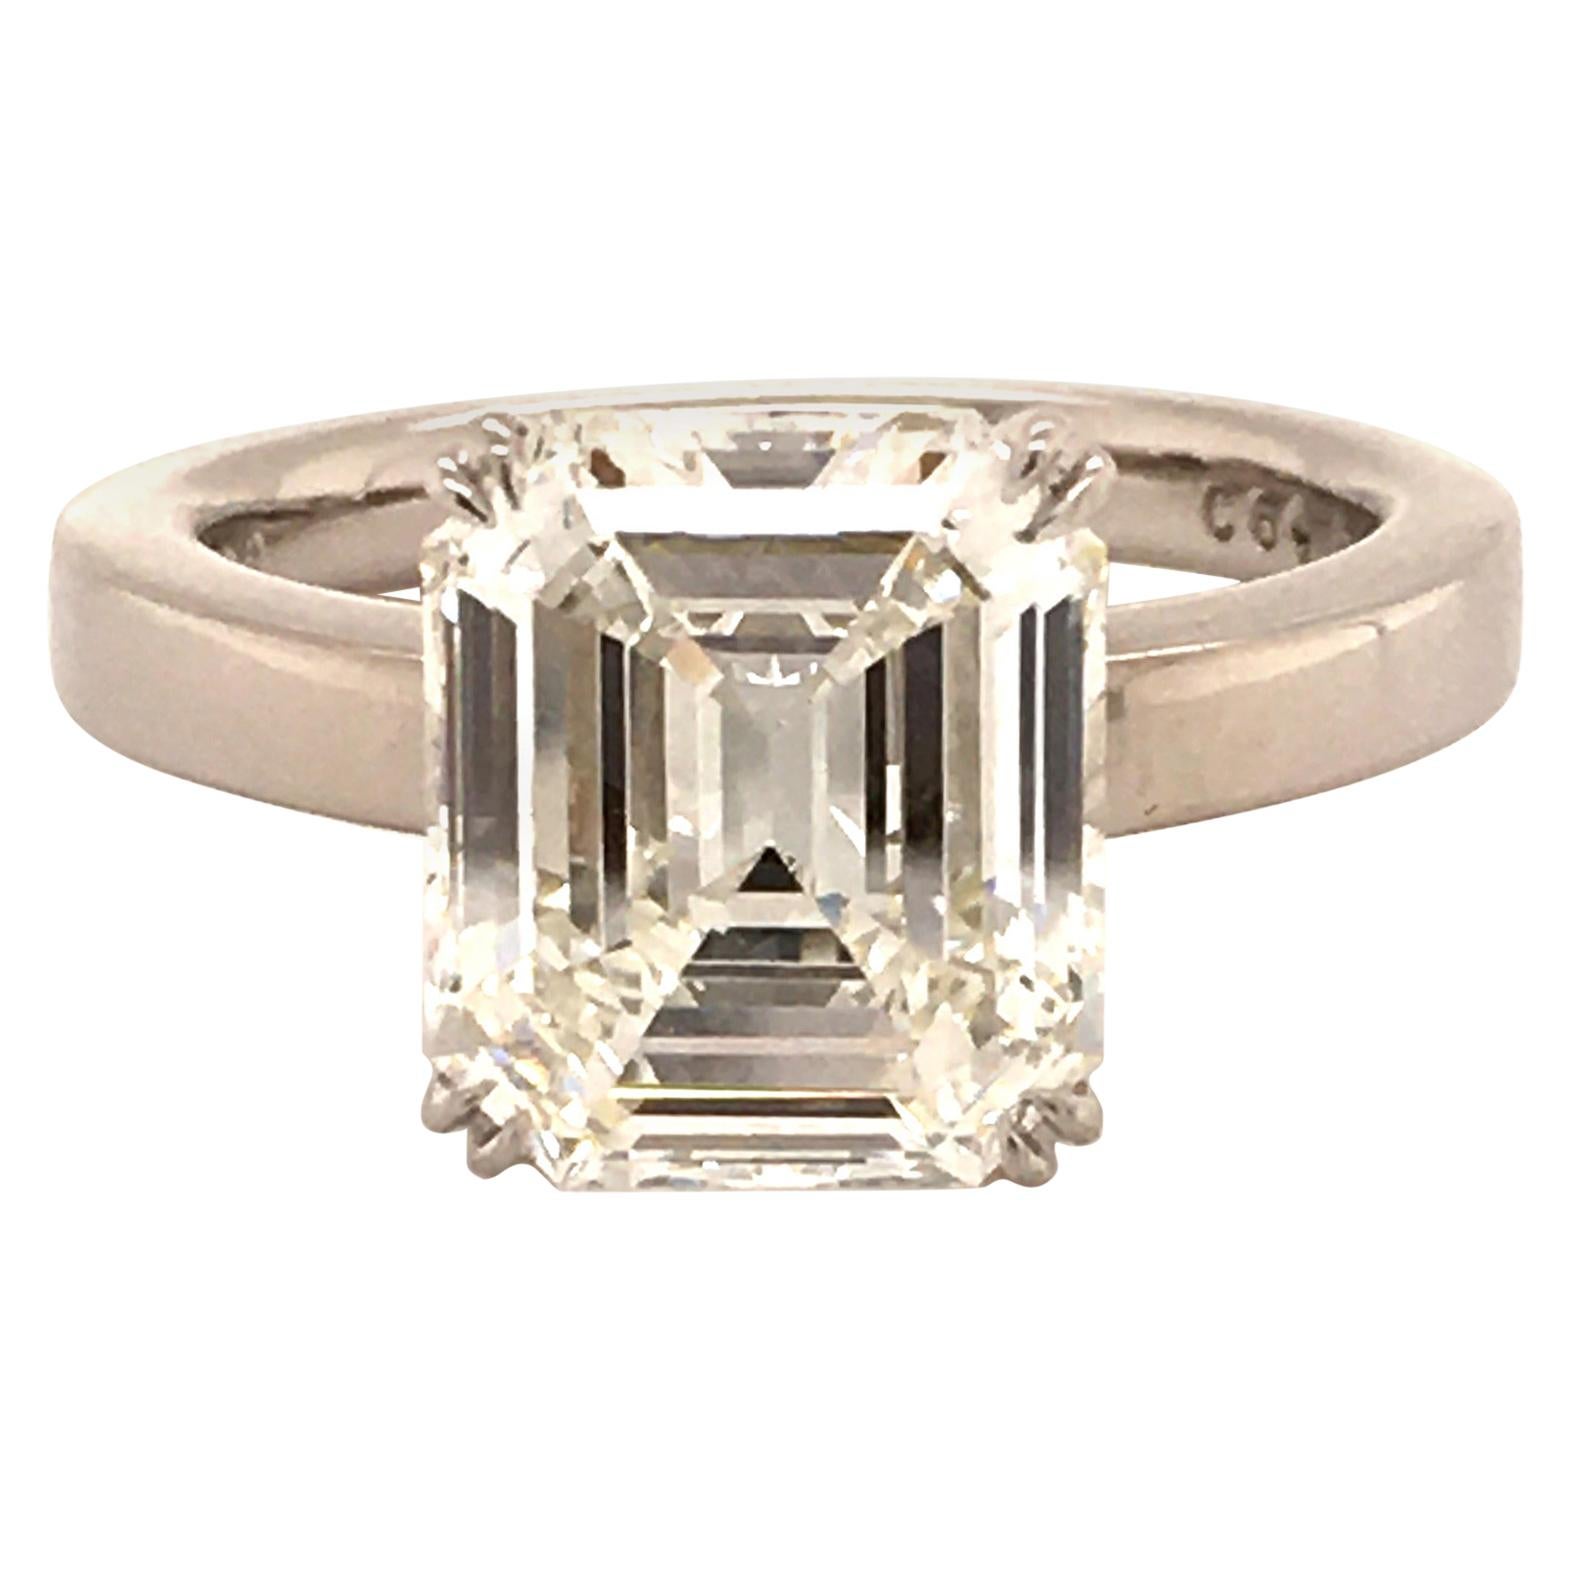 GIA Certified 3.37 Carat H-IF Emerald Cut Diamond Ring For Sale